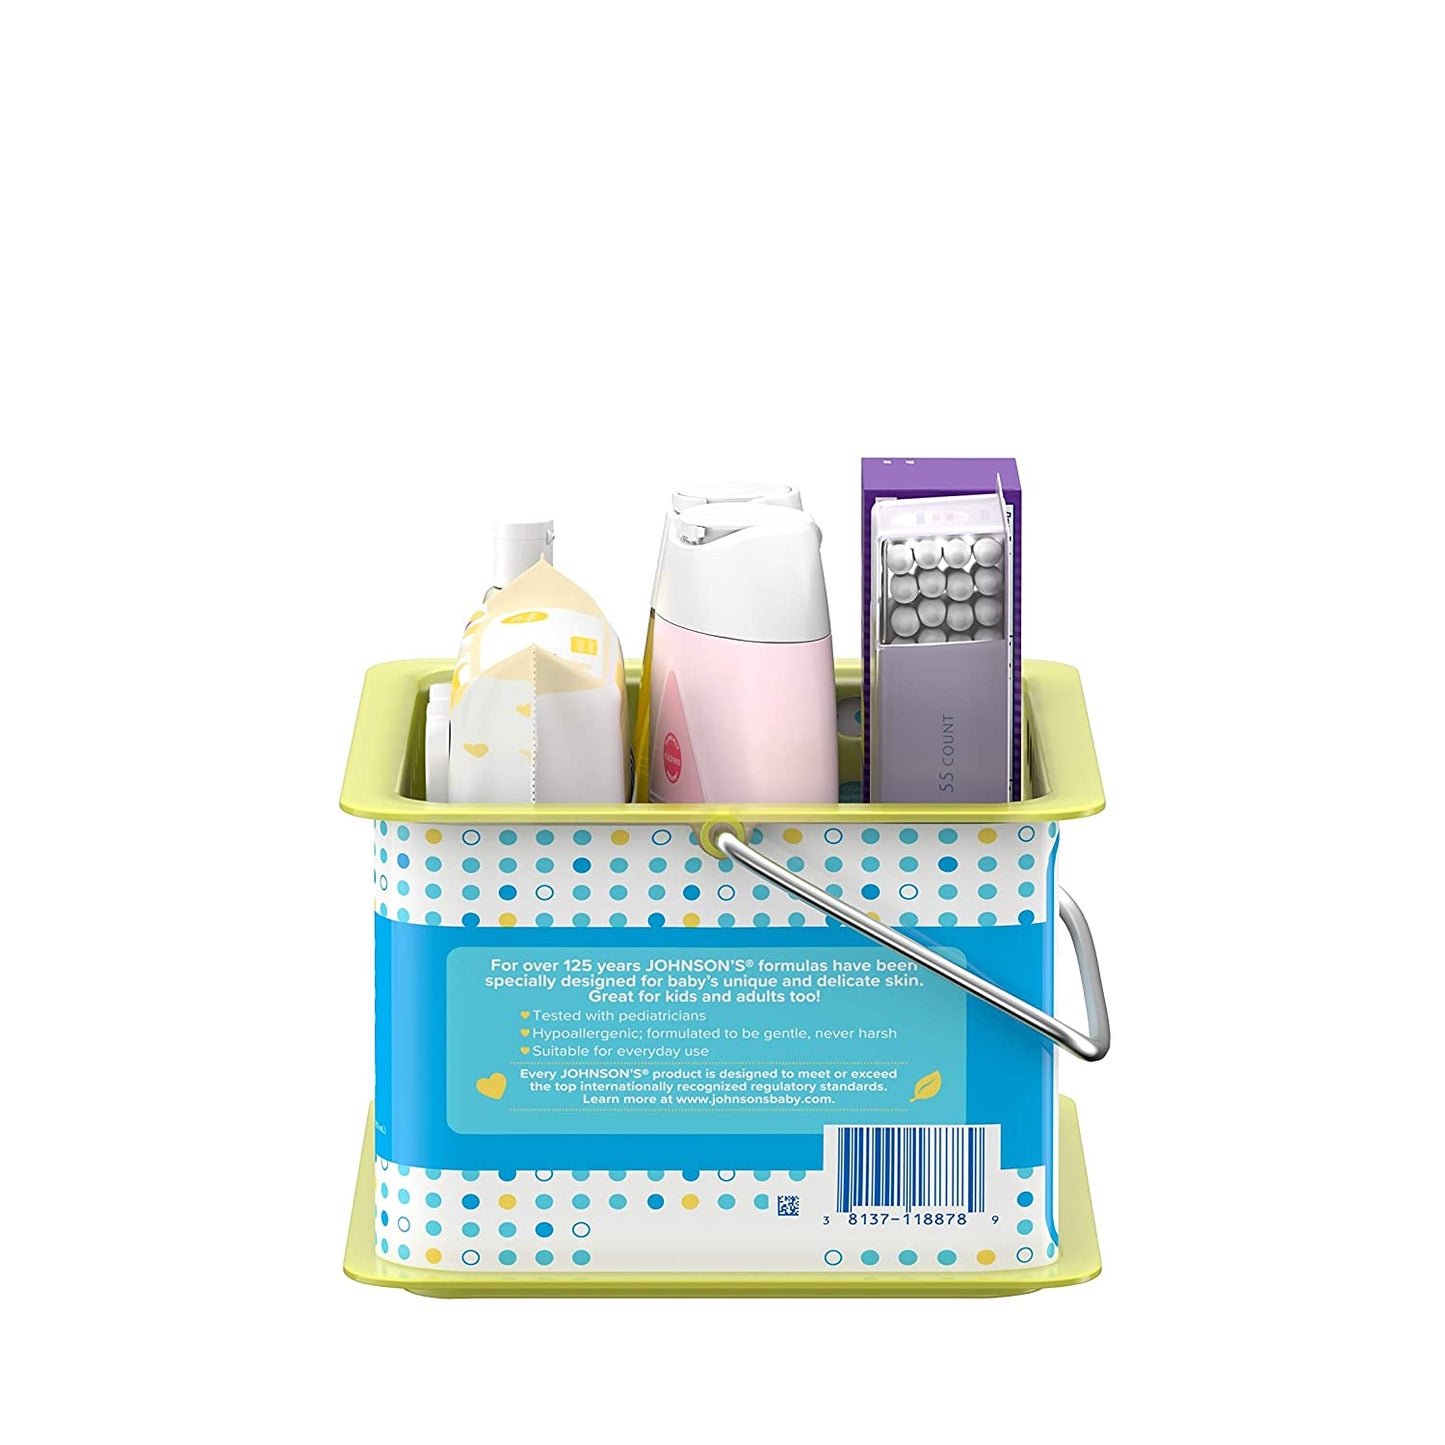 Discovery Gift Set for Parents-to-Be,